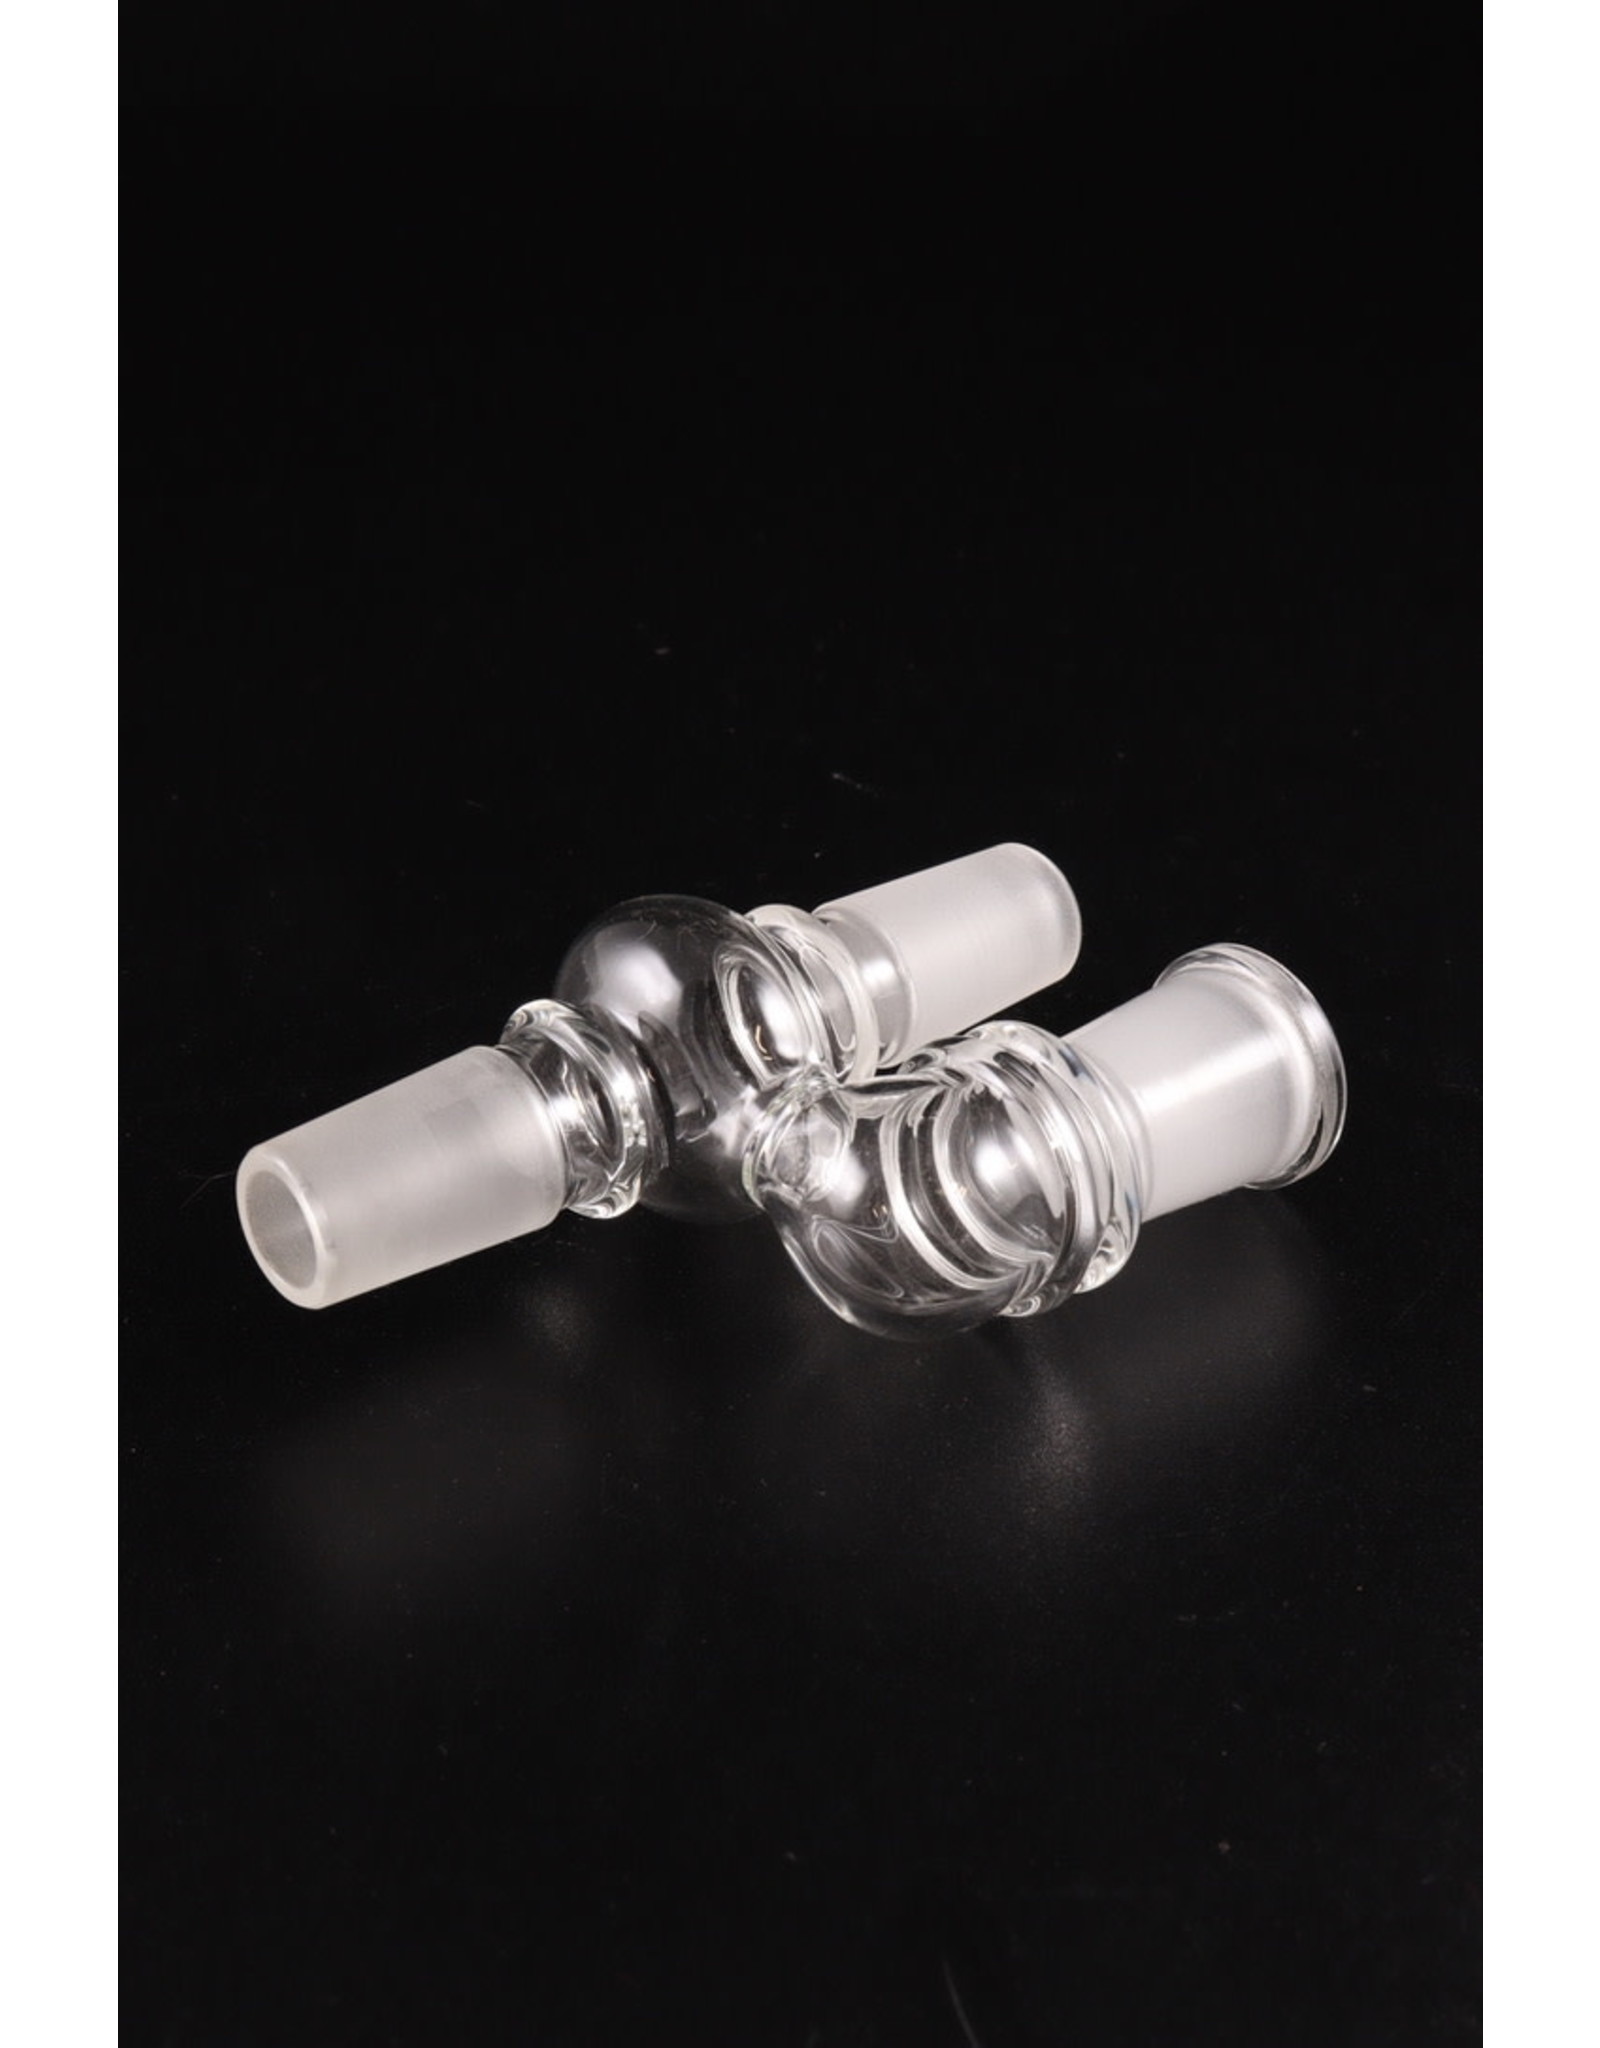 DSK Distribution 19mm Female to 19mm Male/19mm Male - 90˚ Reclaim Collector Adapter